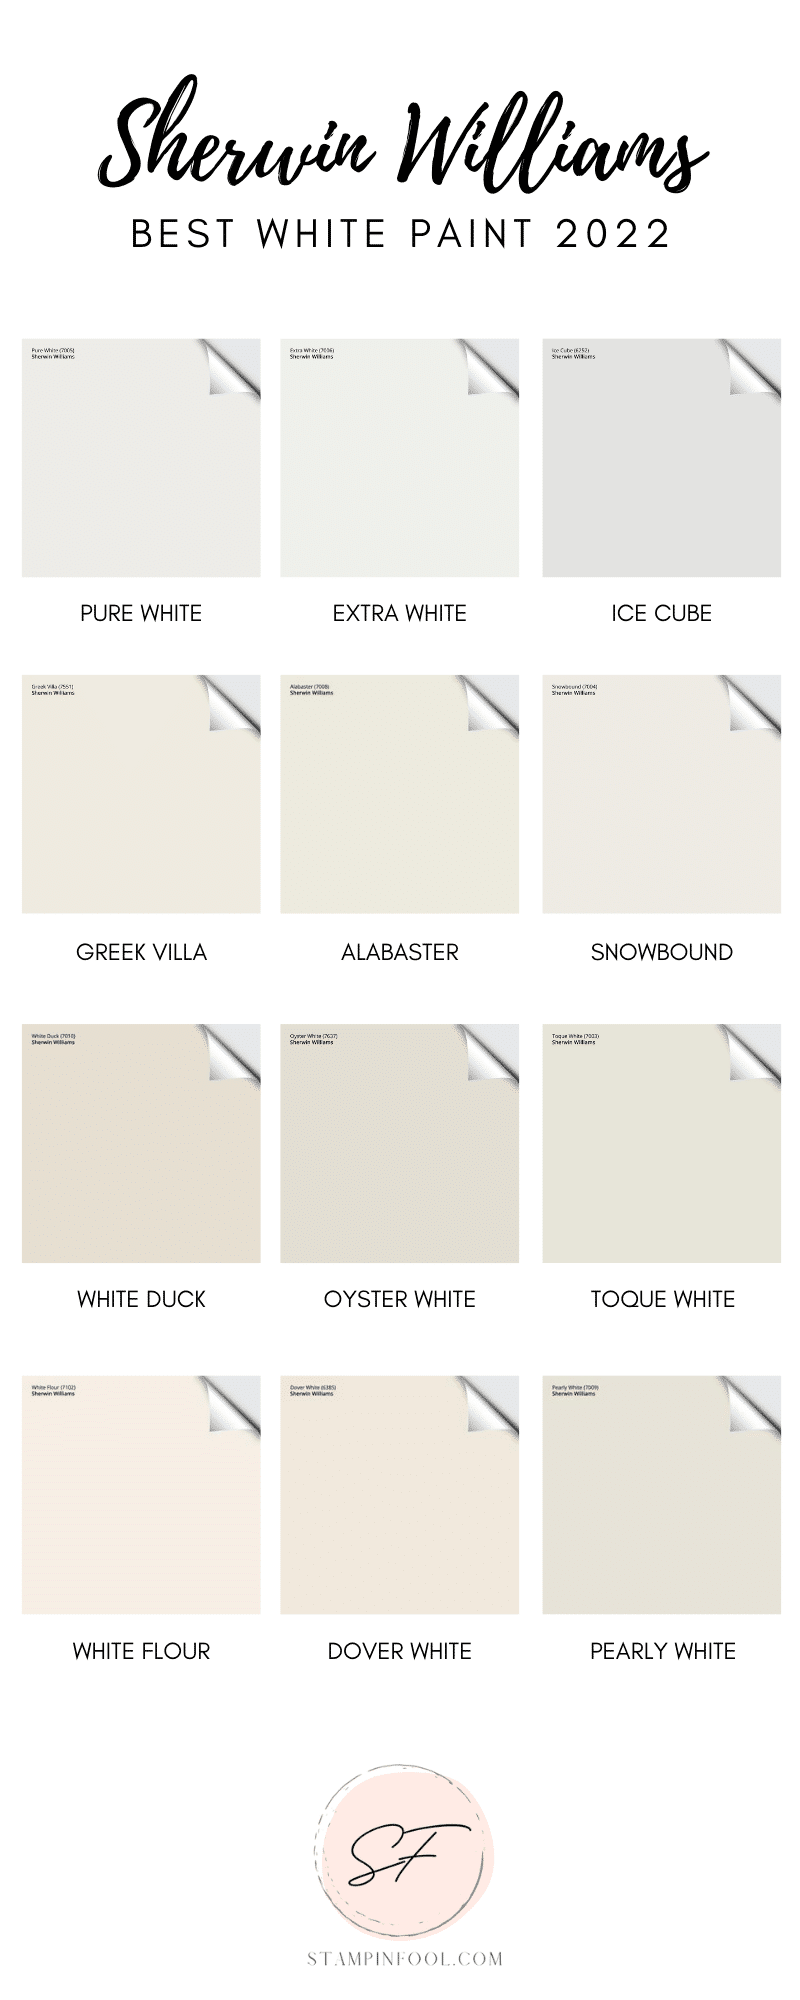 12 Best Sherwin Williams White Paint Colors for 2022